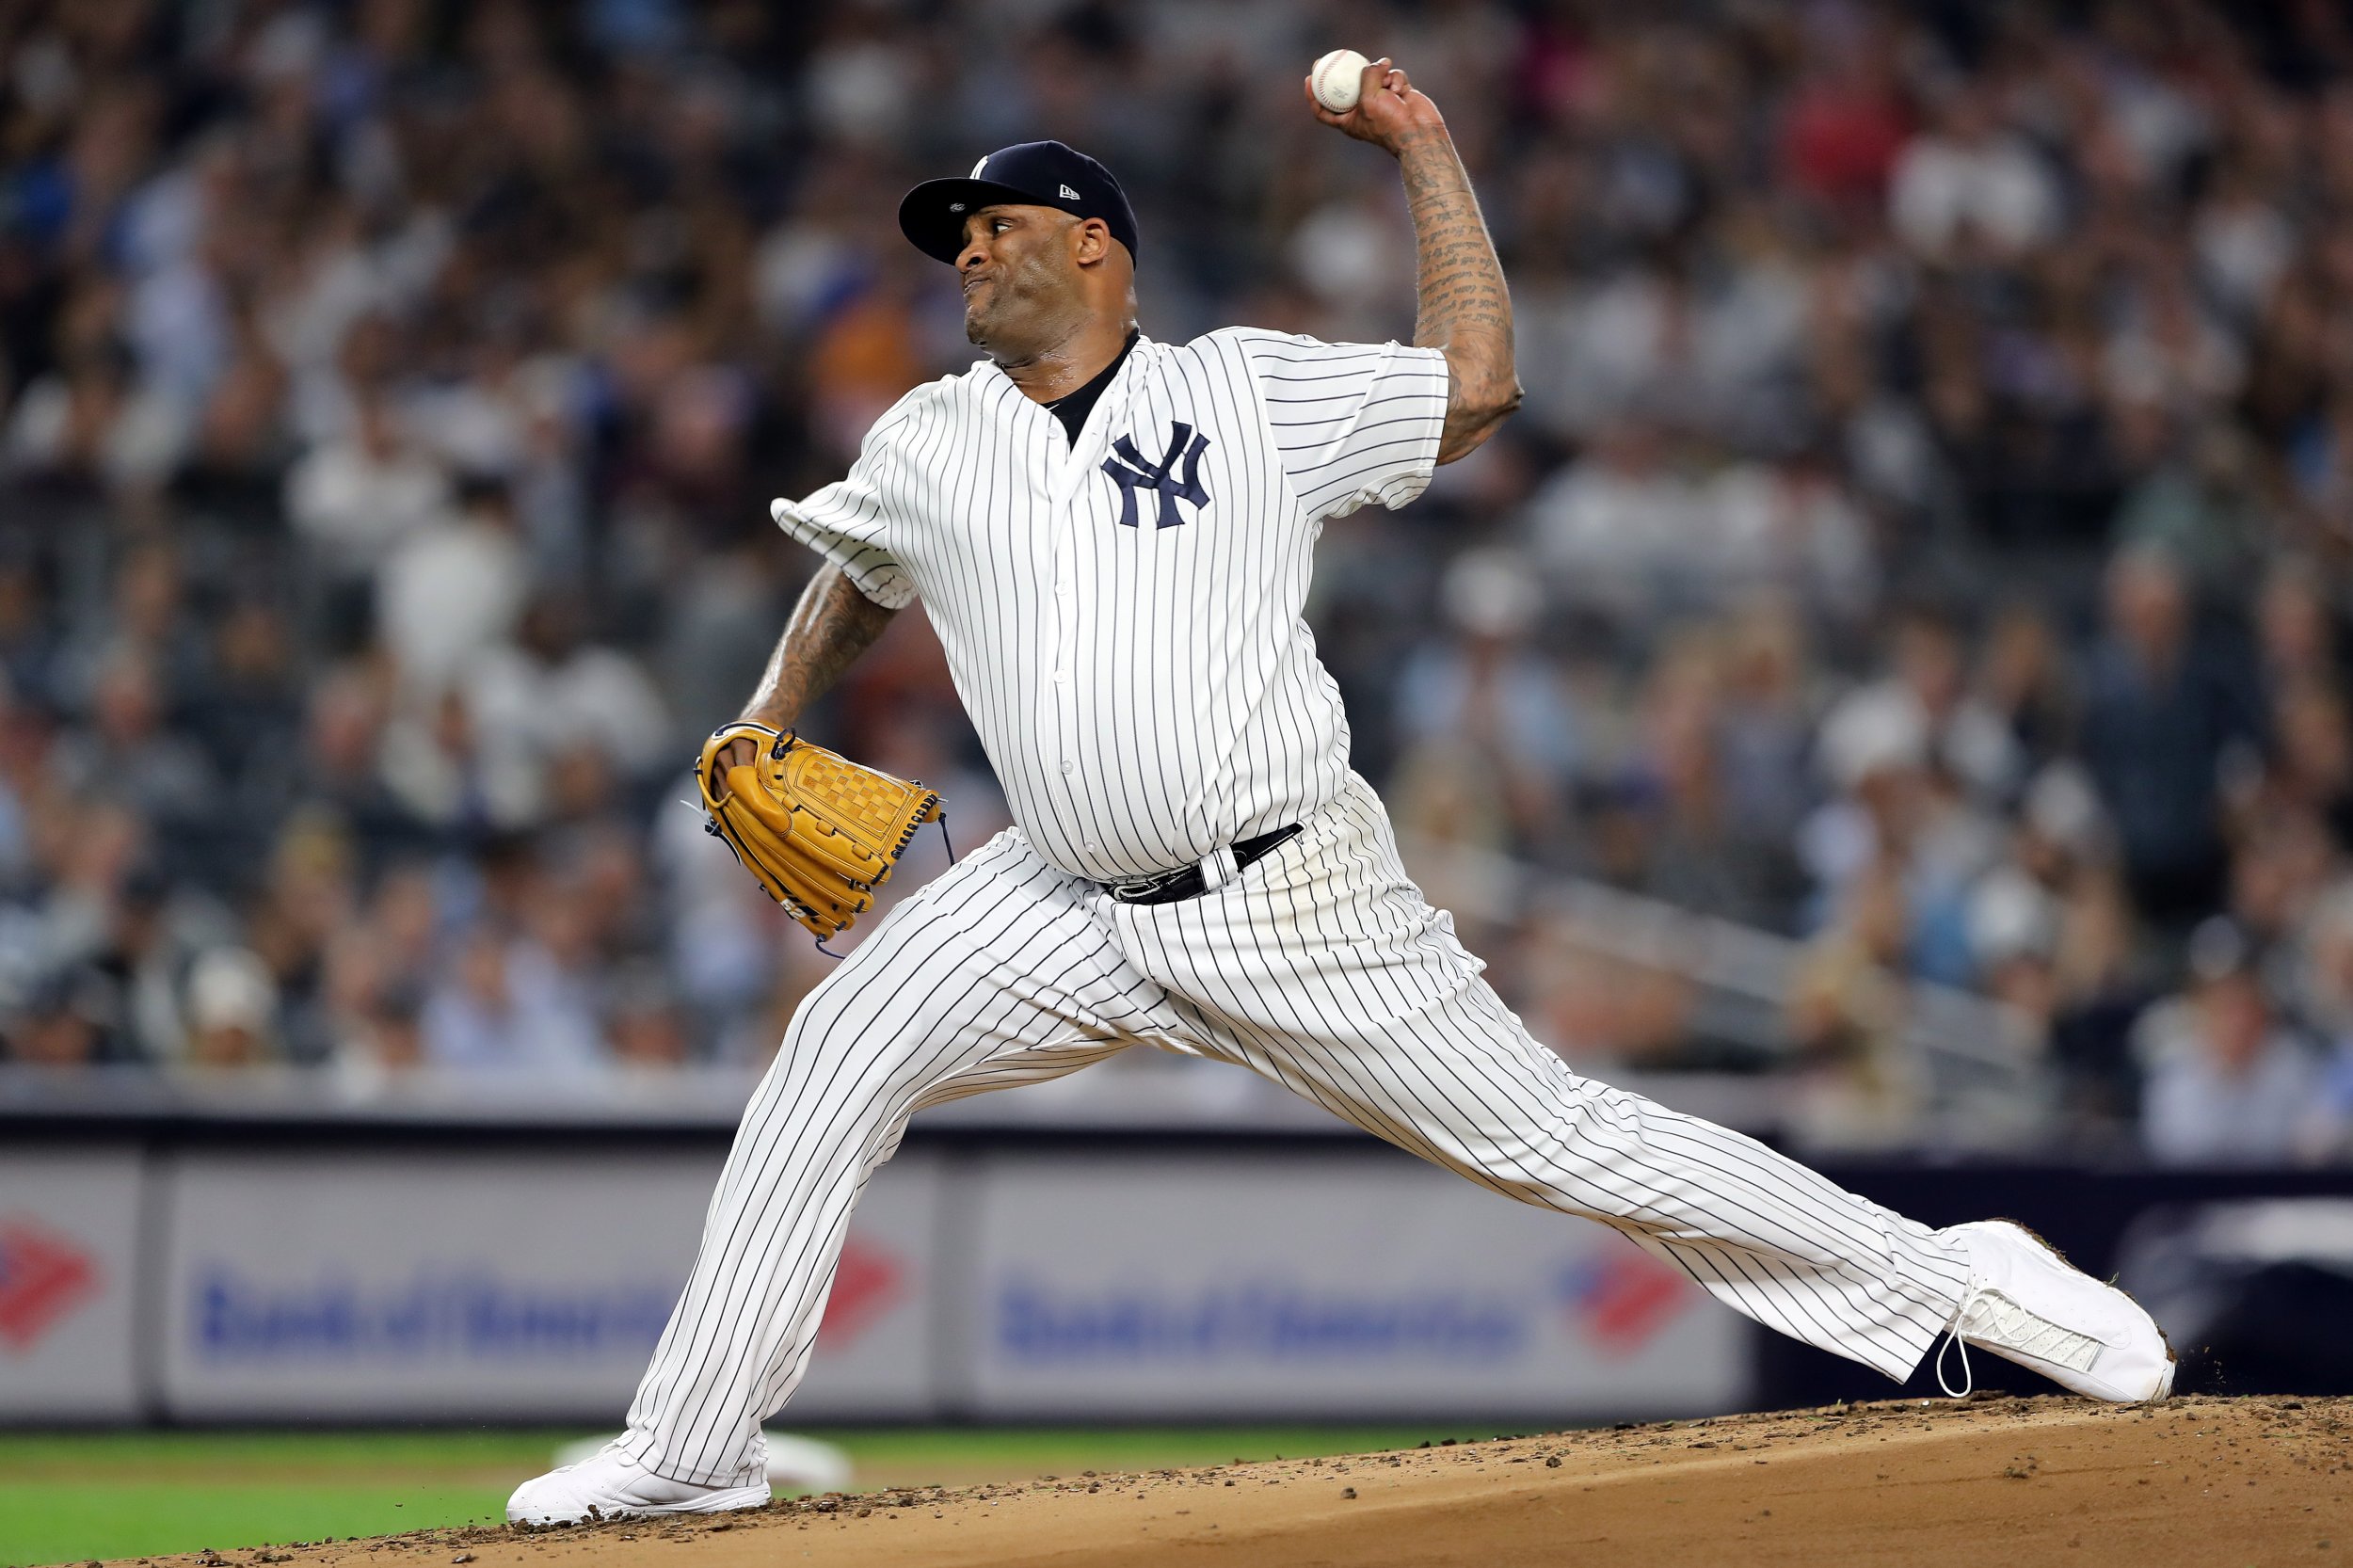 Yankees' CC Sabathia gets invite to 2019 MLB All-Star Game for